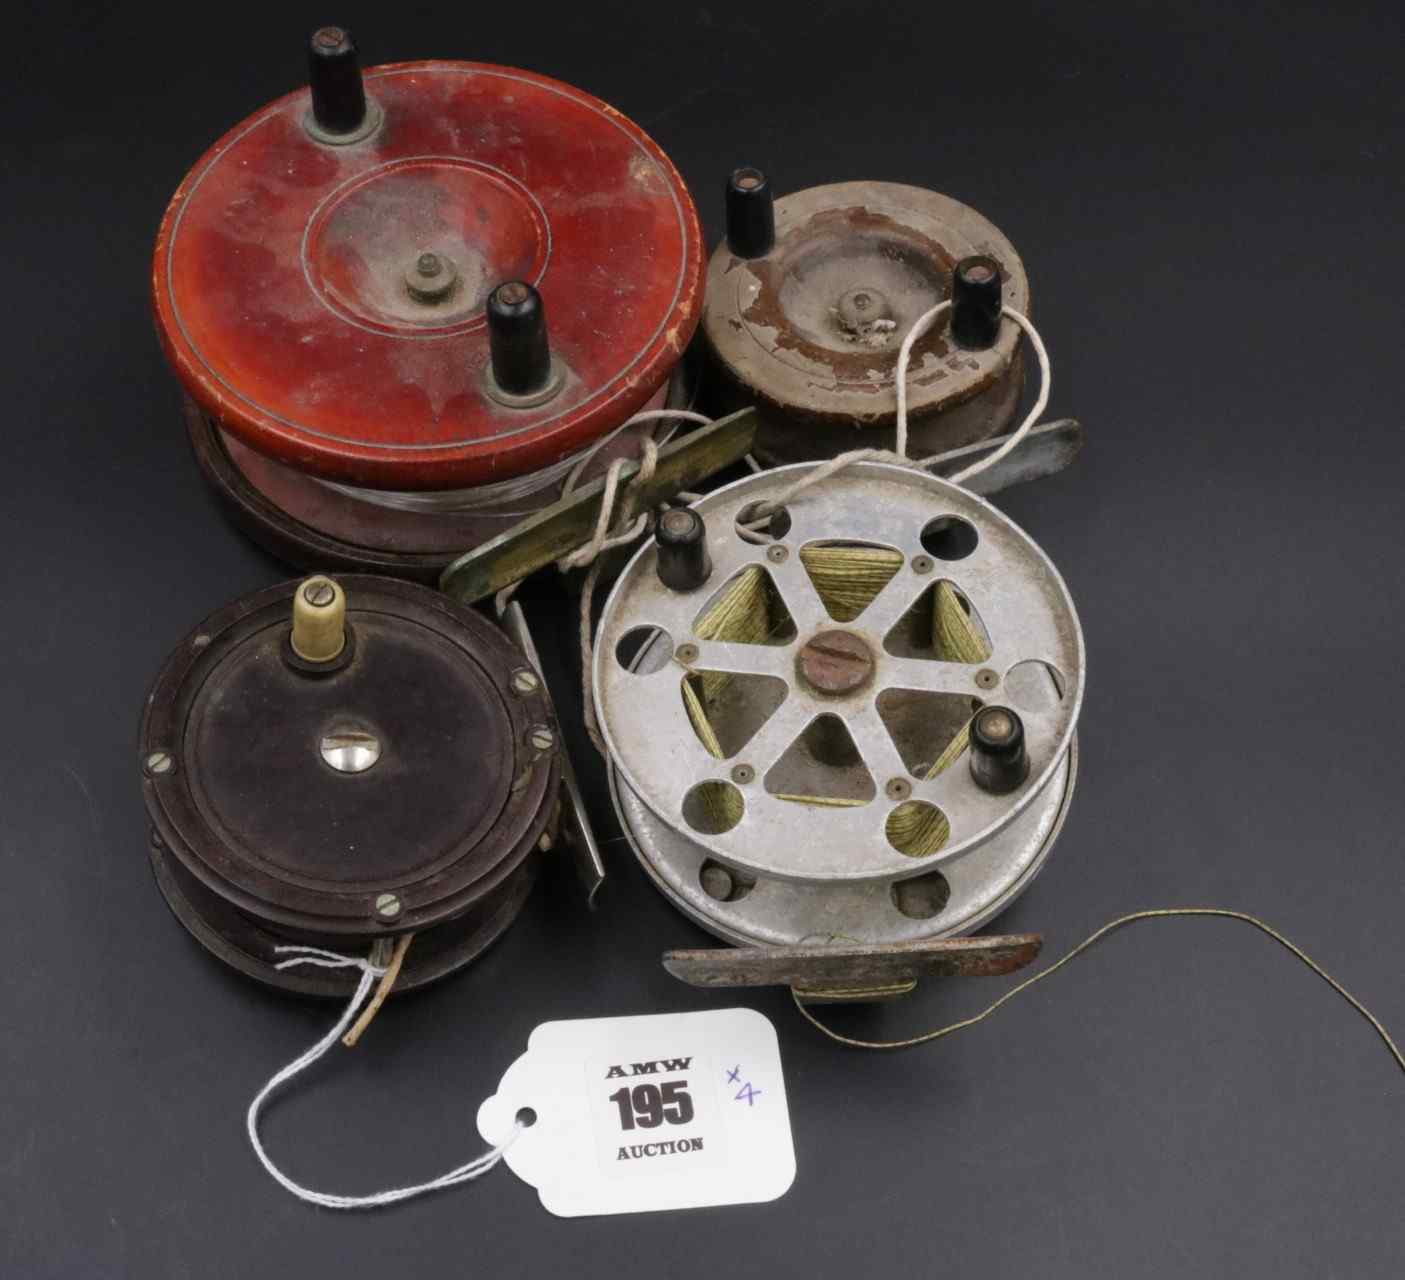 Lot 195: 4 x Allcock Vintage Fishing Reels - AMW Auction Rooms